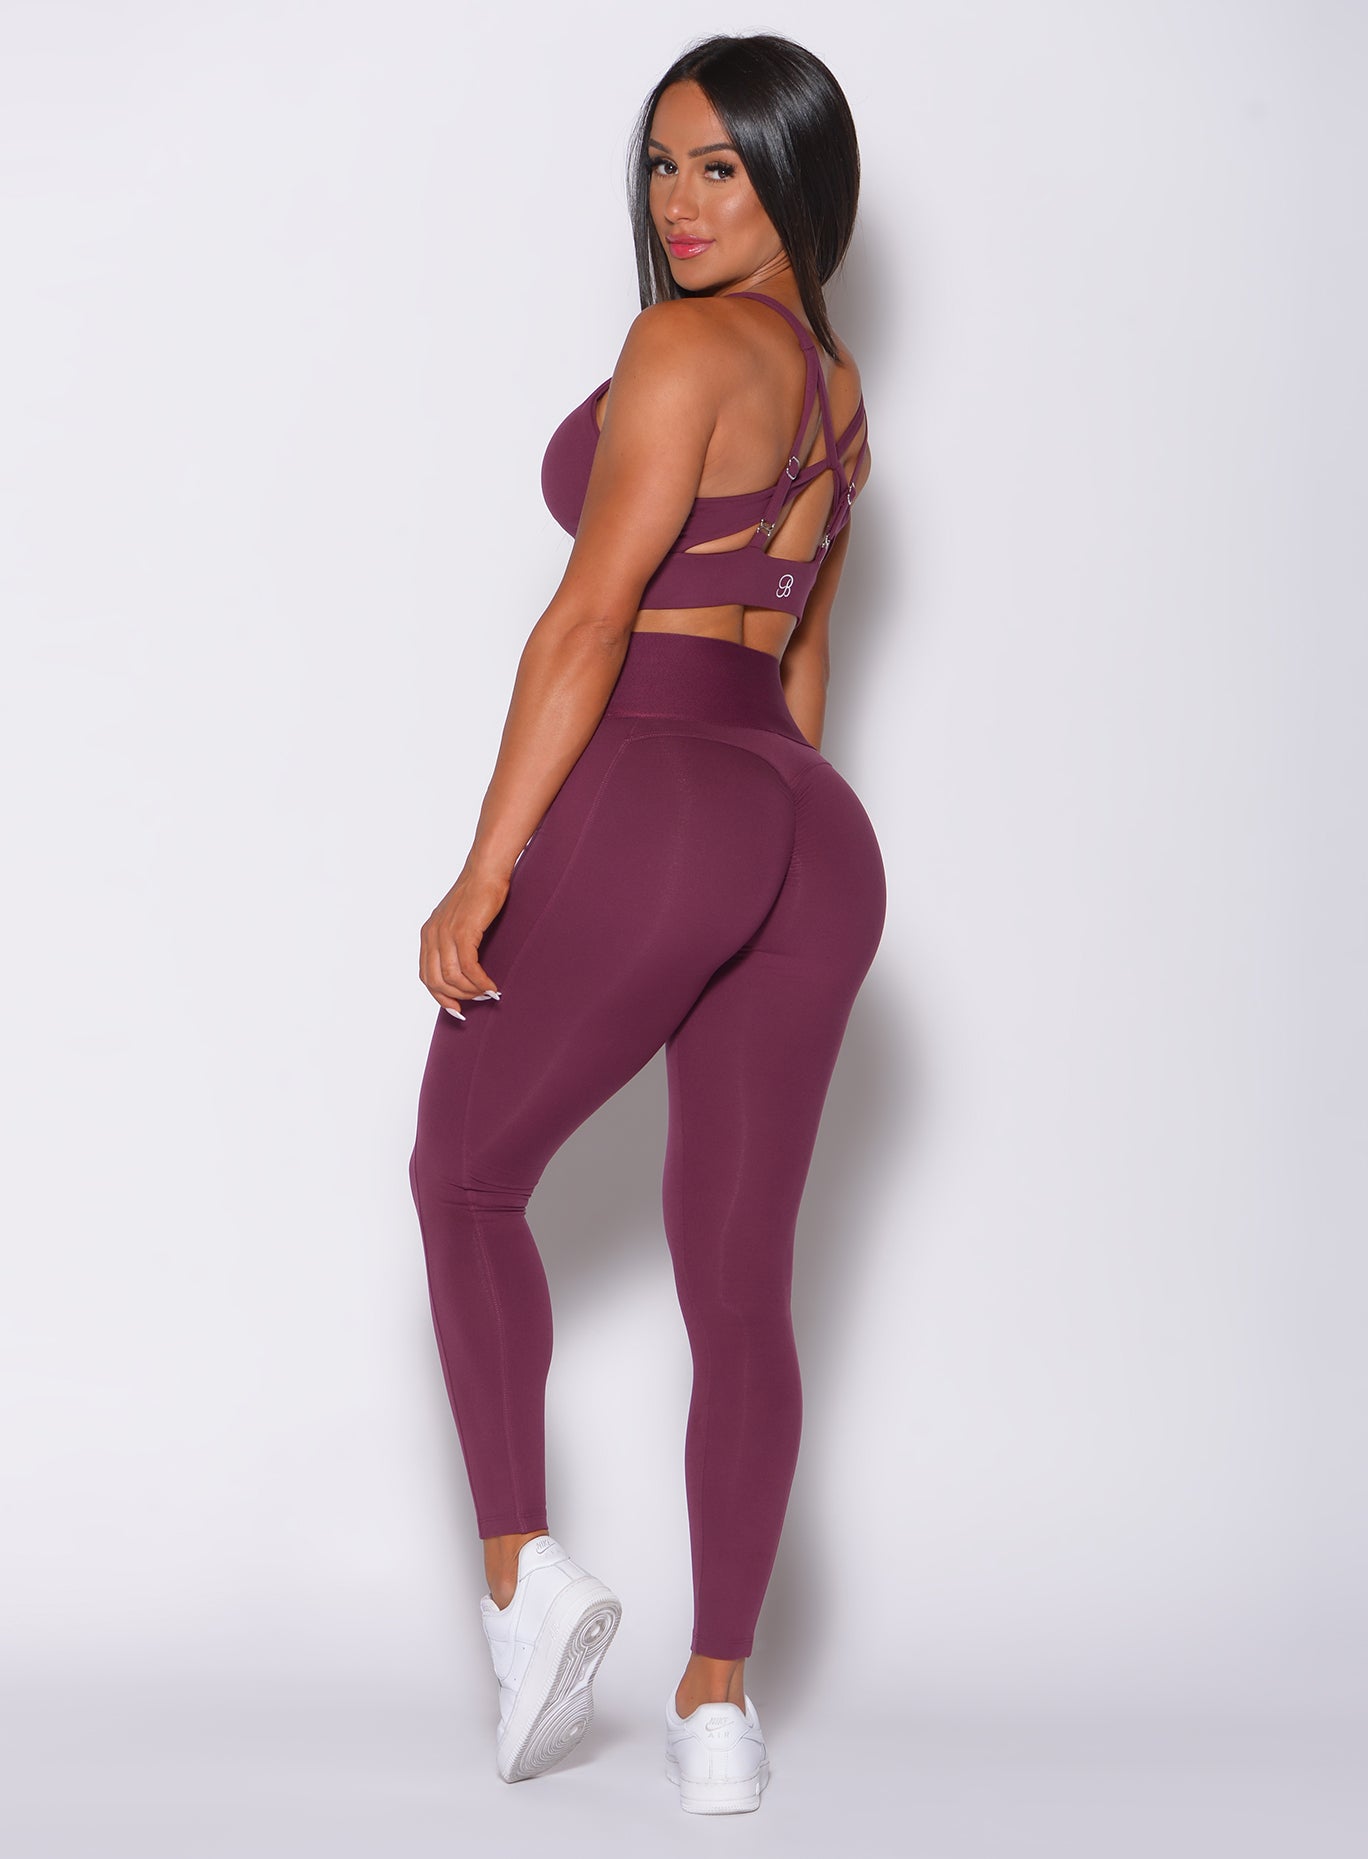 Left side profile view of a model in our waist cincher leggings in majestic purple color and a matching bra